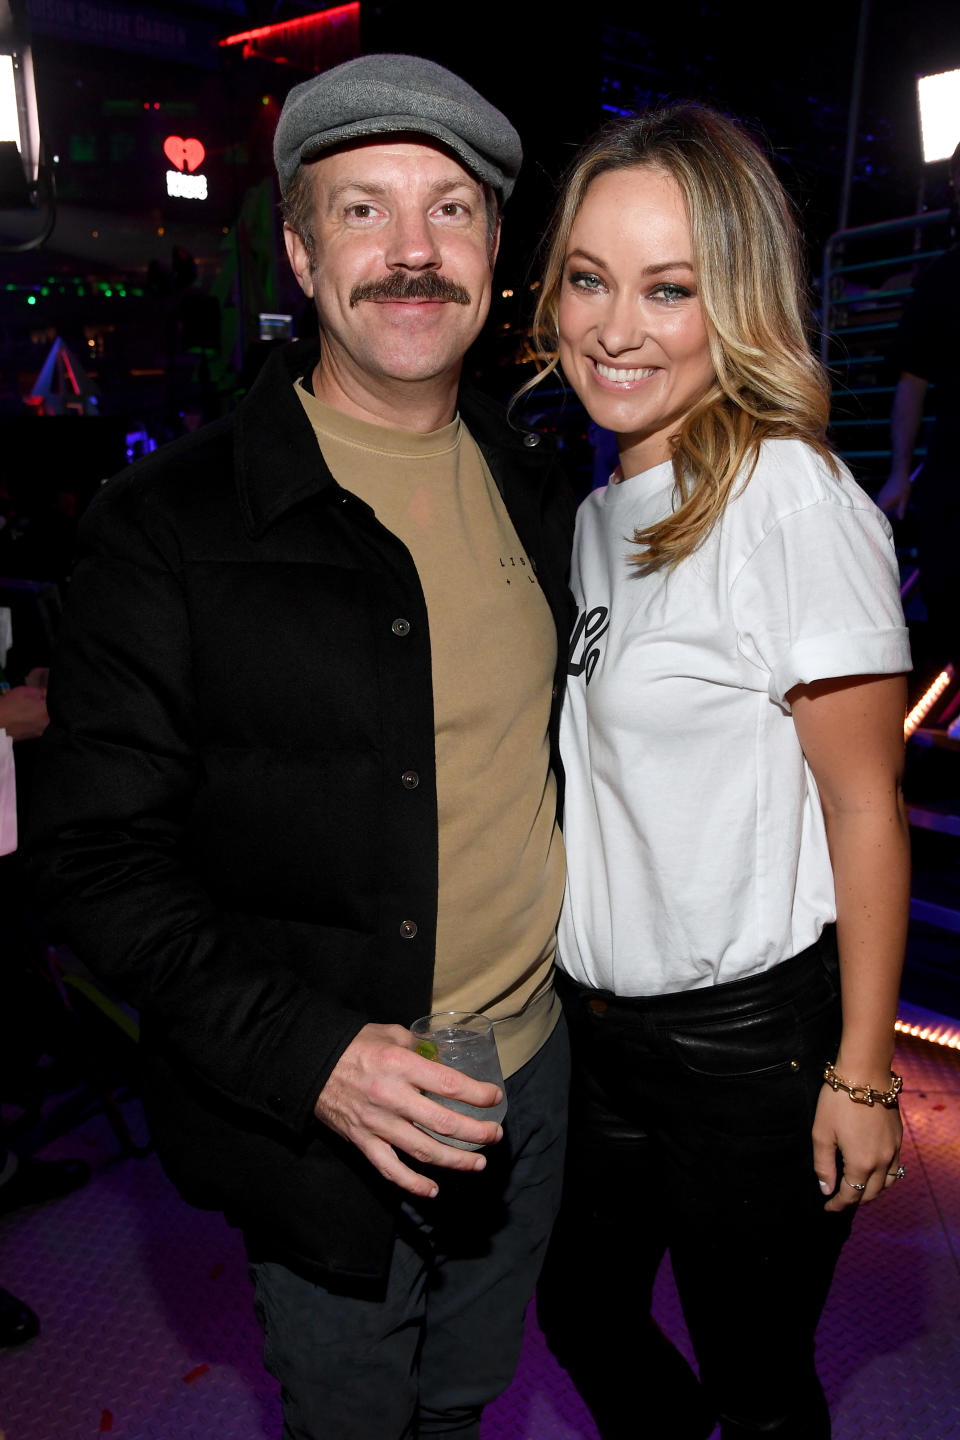 Two people posing for a photo, man in a cap and jacket, woman in a white tee and black pants